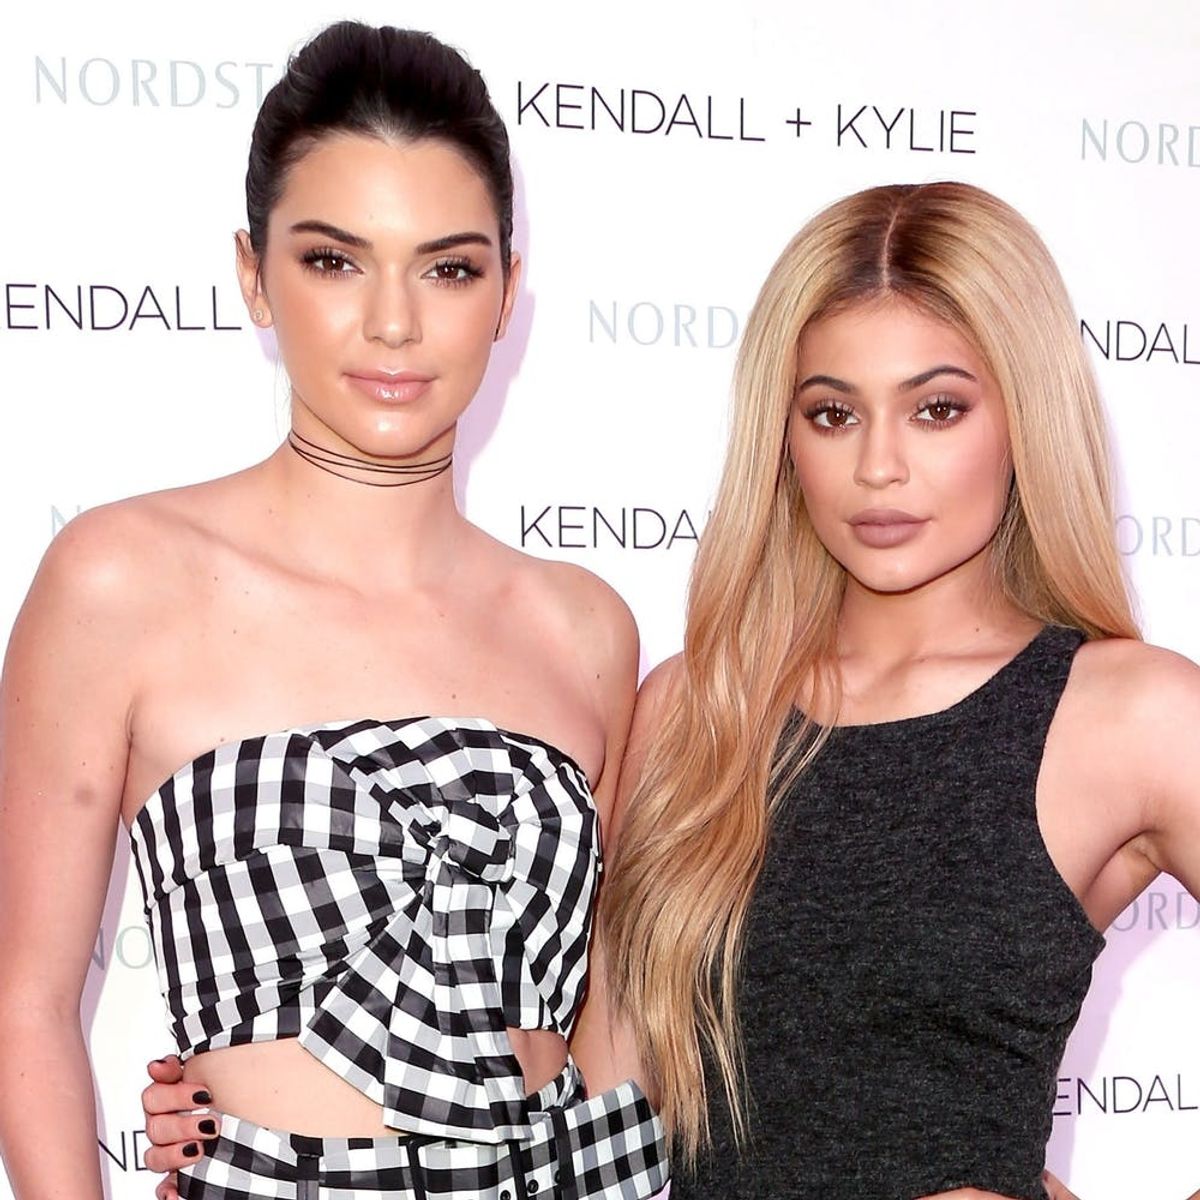 Uh Oh: Kendall and Kylie Jenner Are Being Sued Over *Those* Band Tees